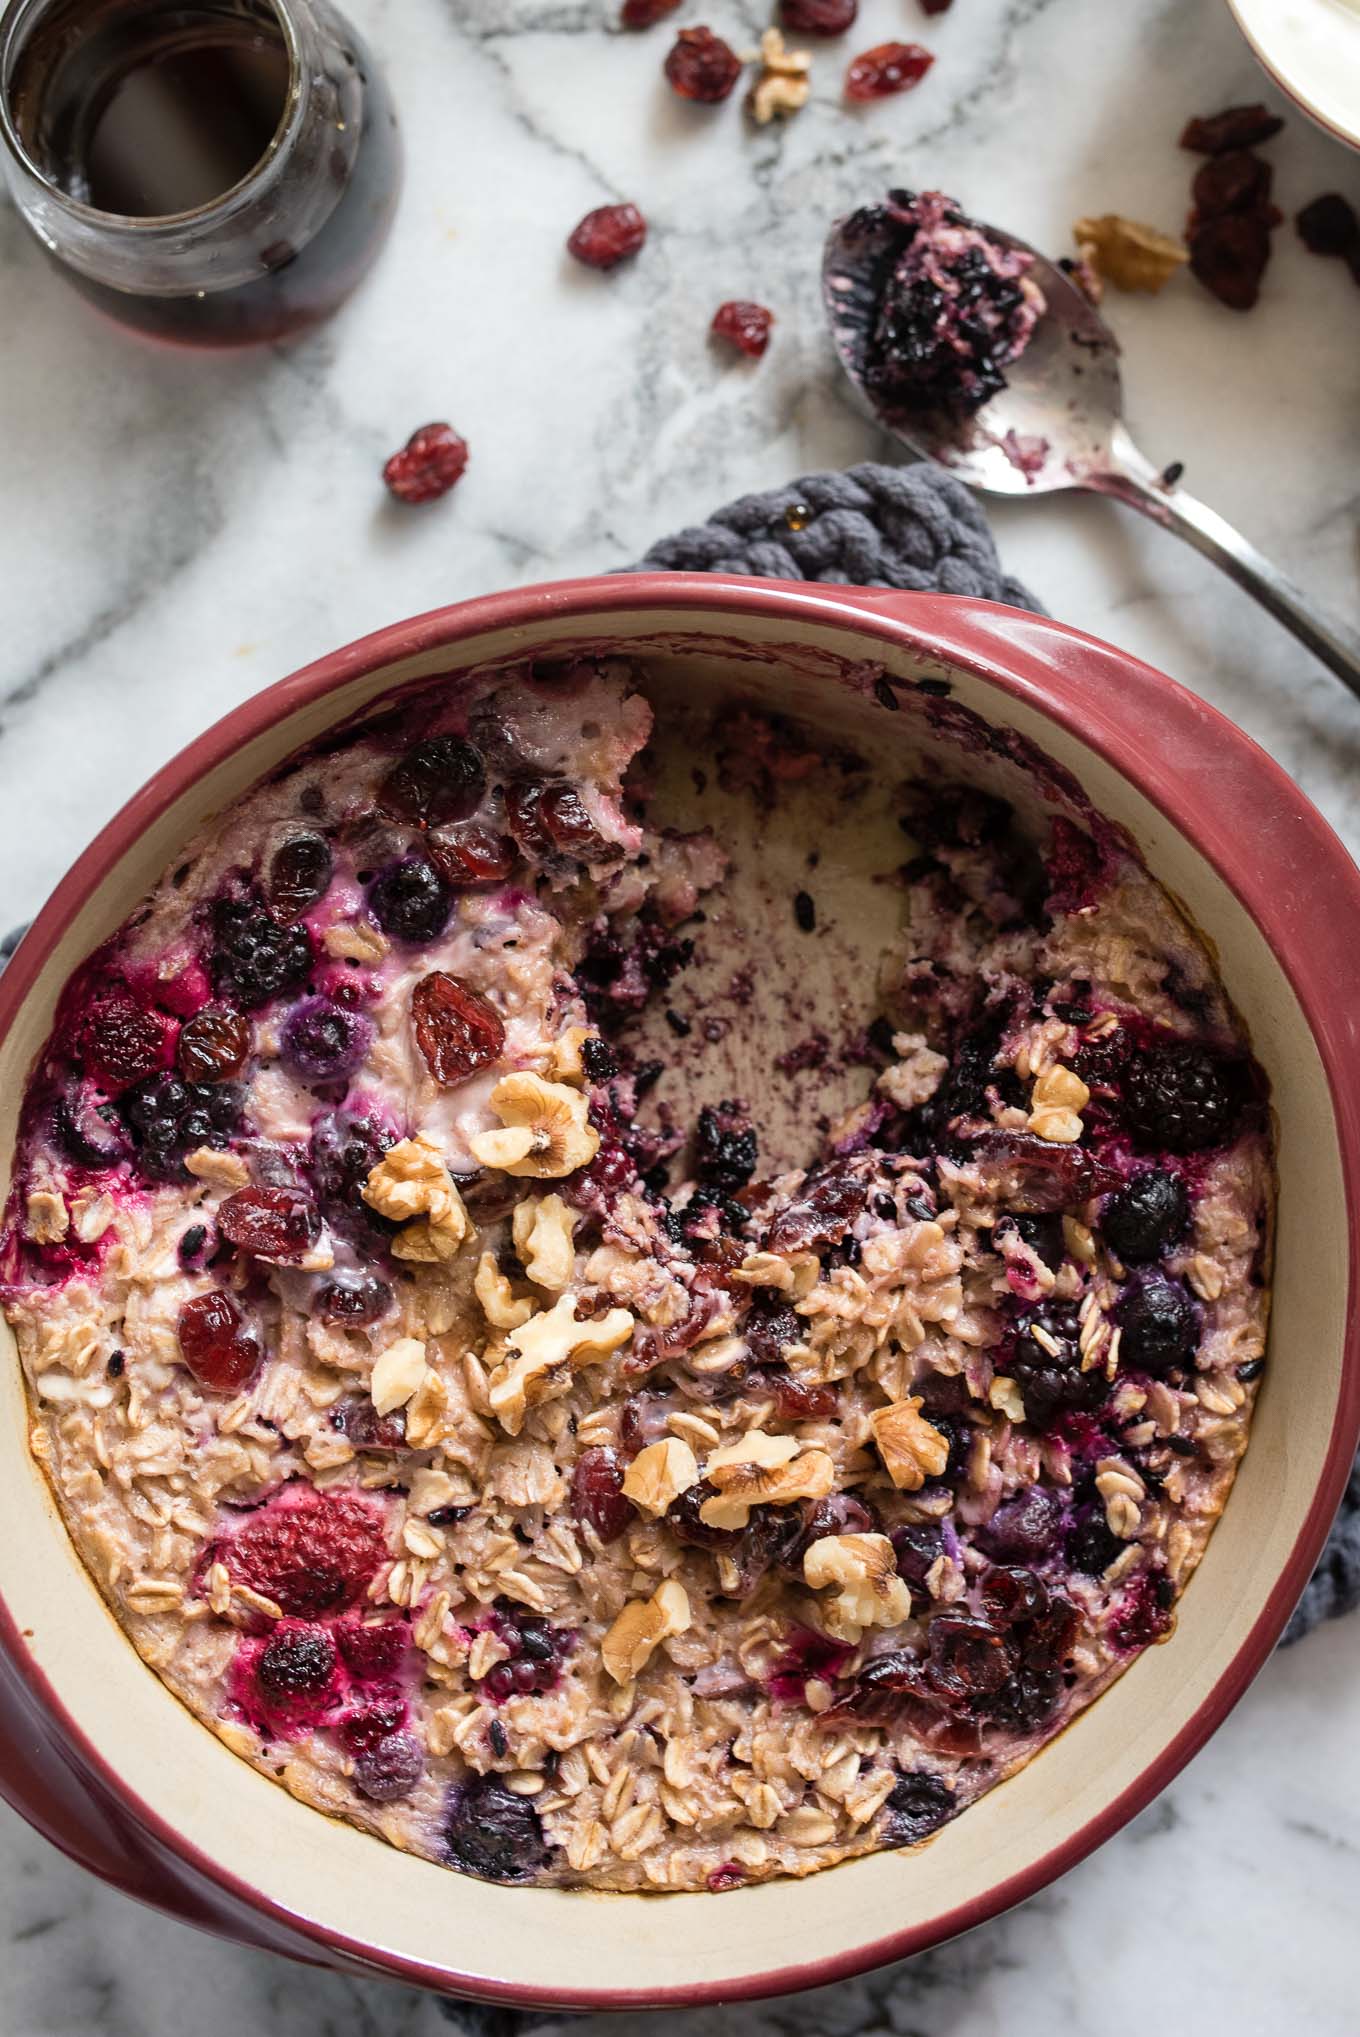 Berry Lavender Baked Oatmeal is a simple, gluten-free nourishing breakfast to help you start your day off right.